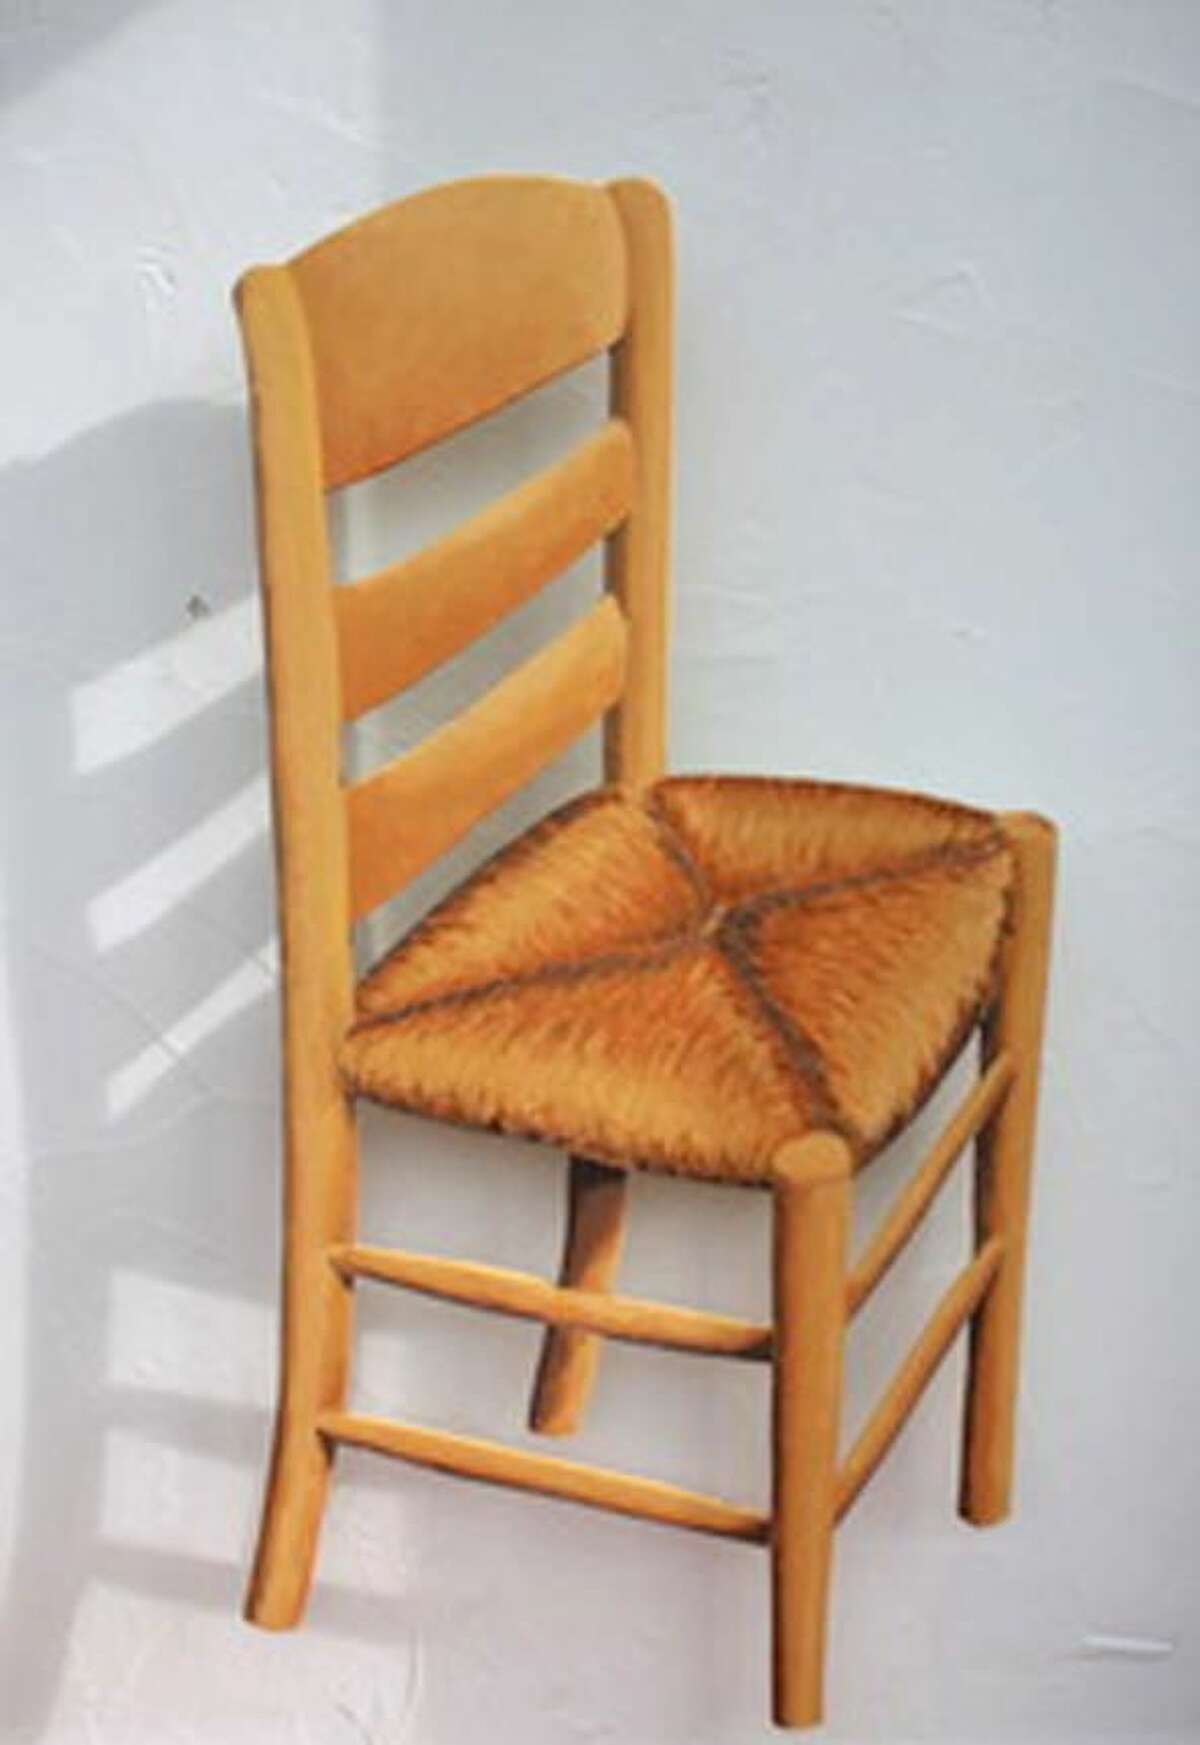 "The Vincent Chair"